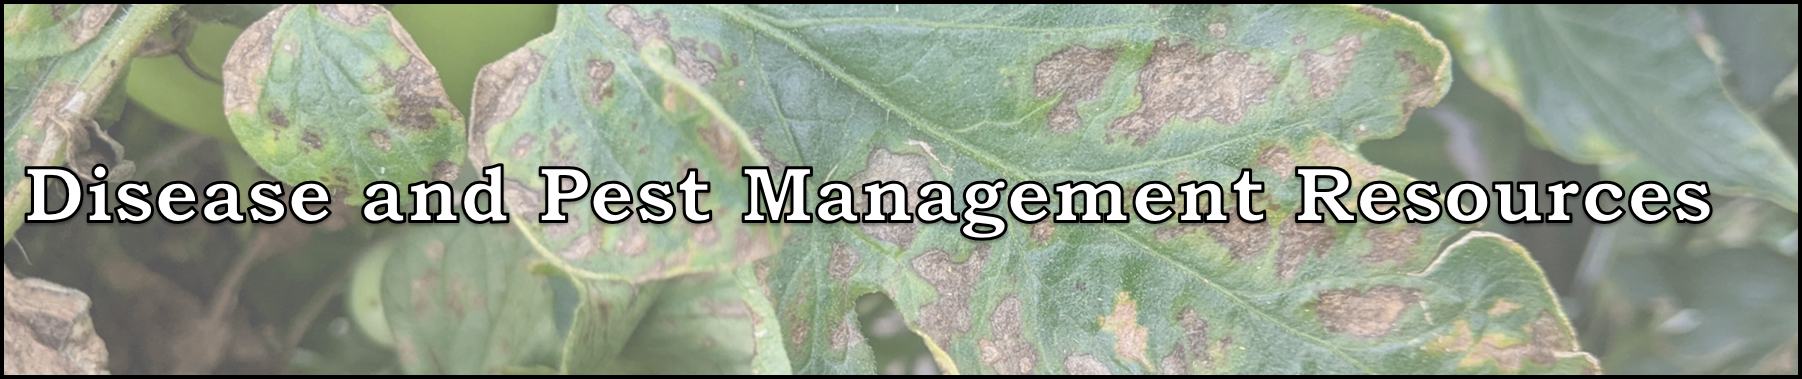 Disease and Pest Management Resources